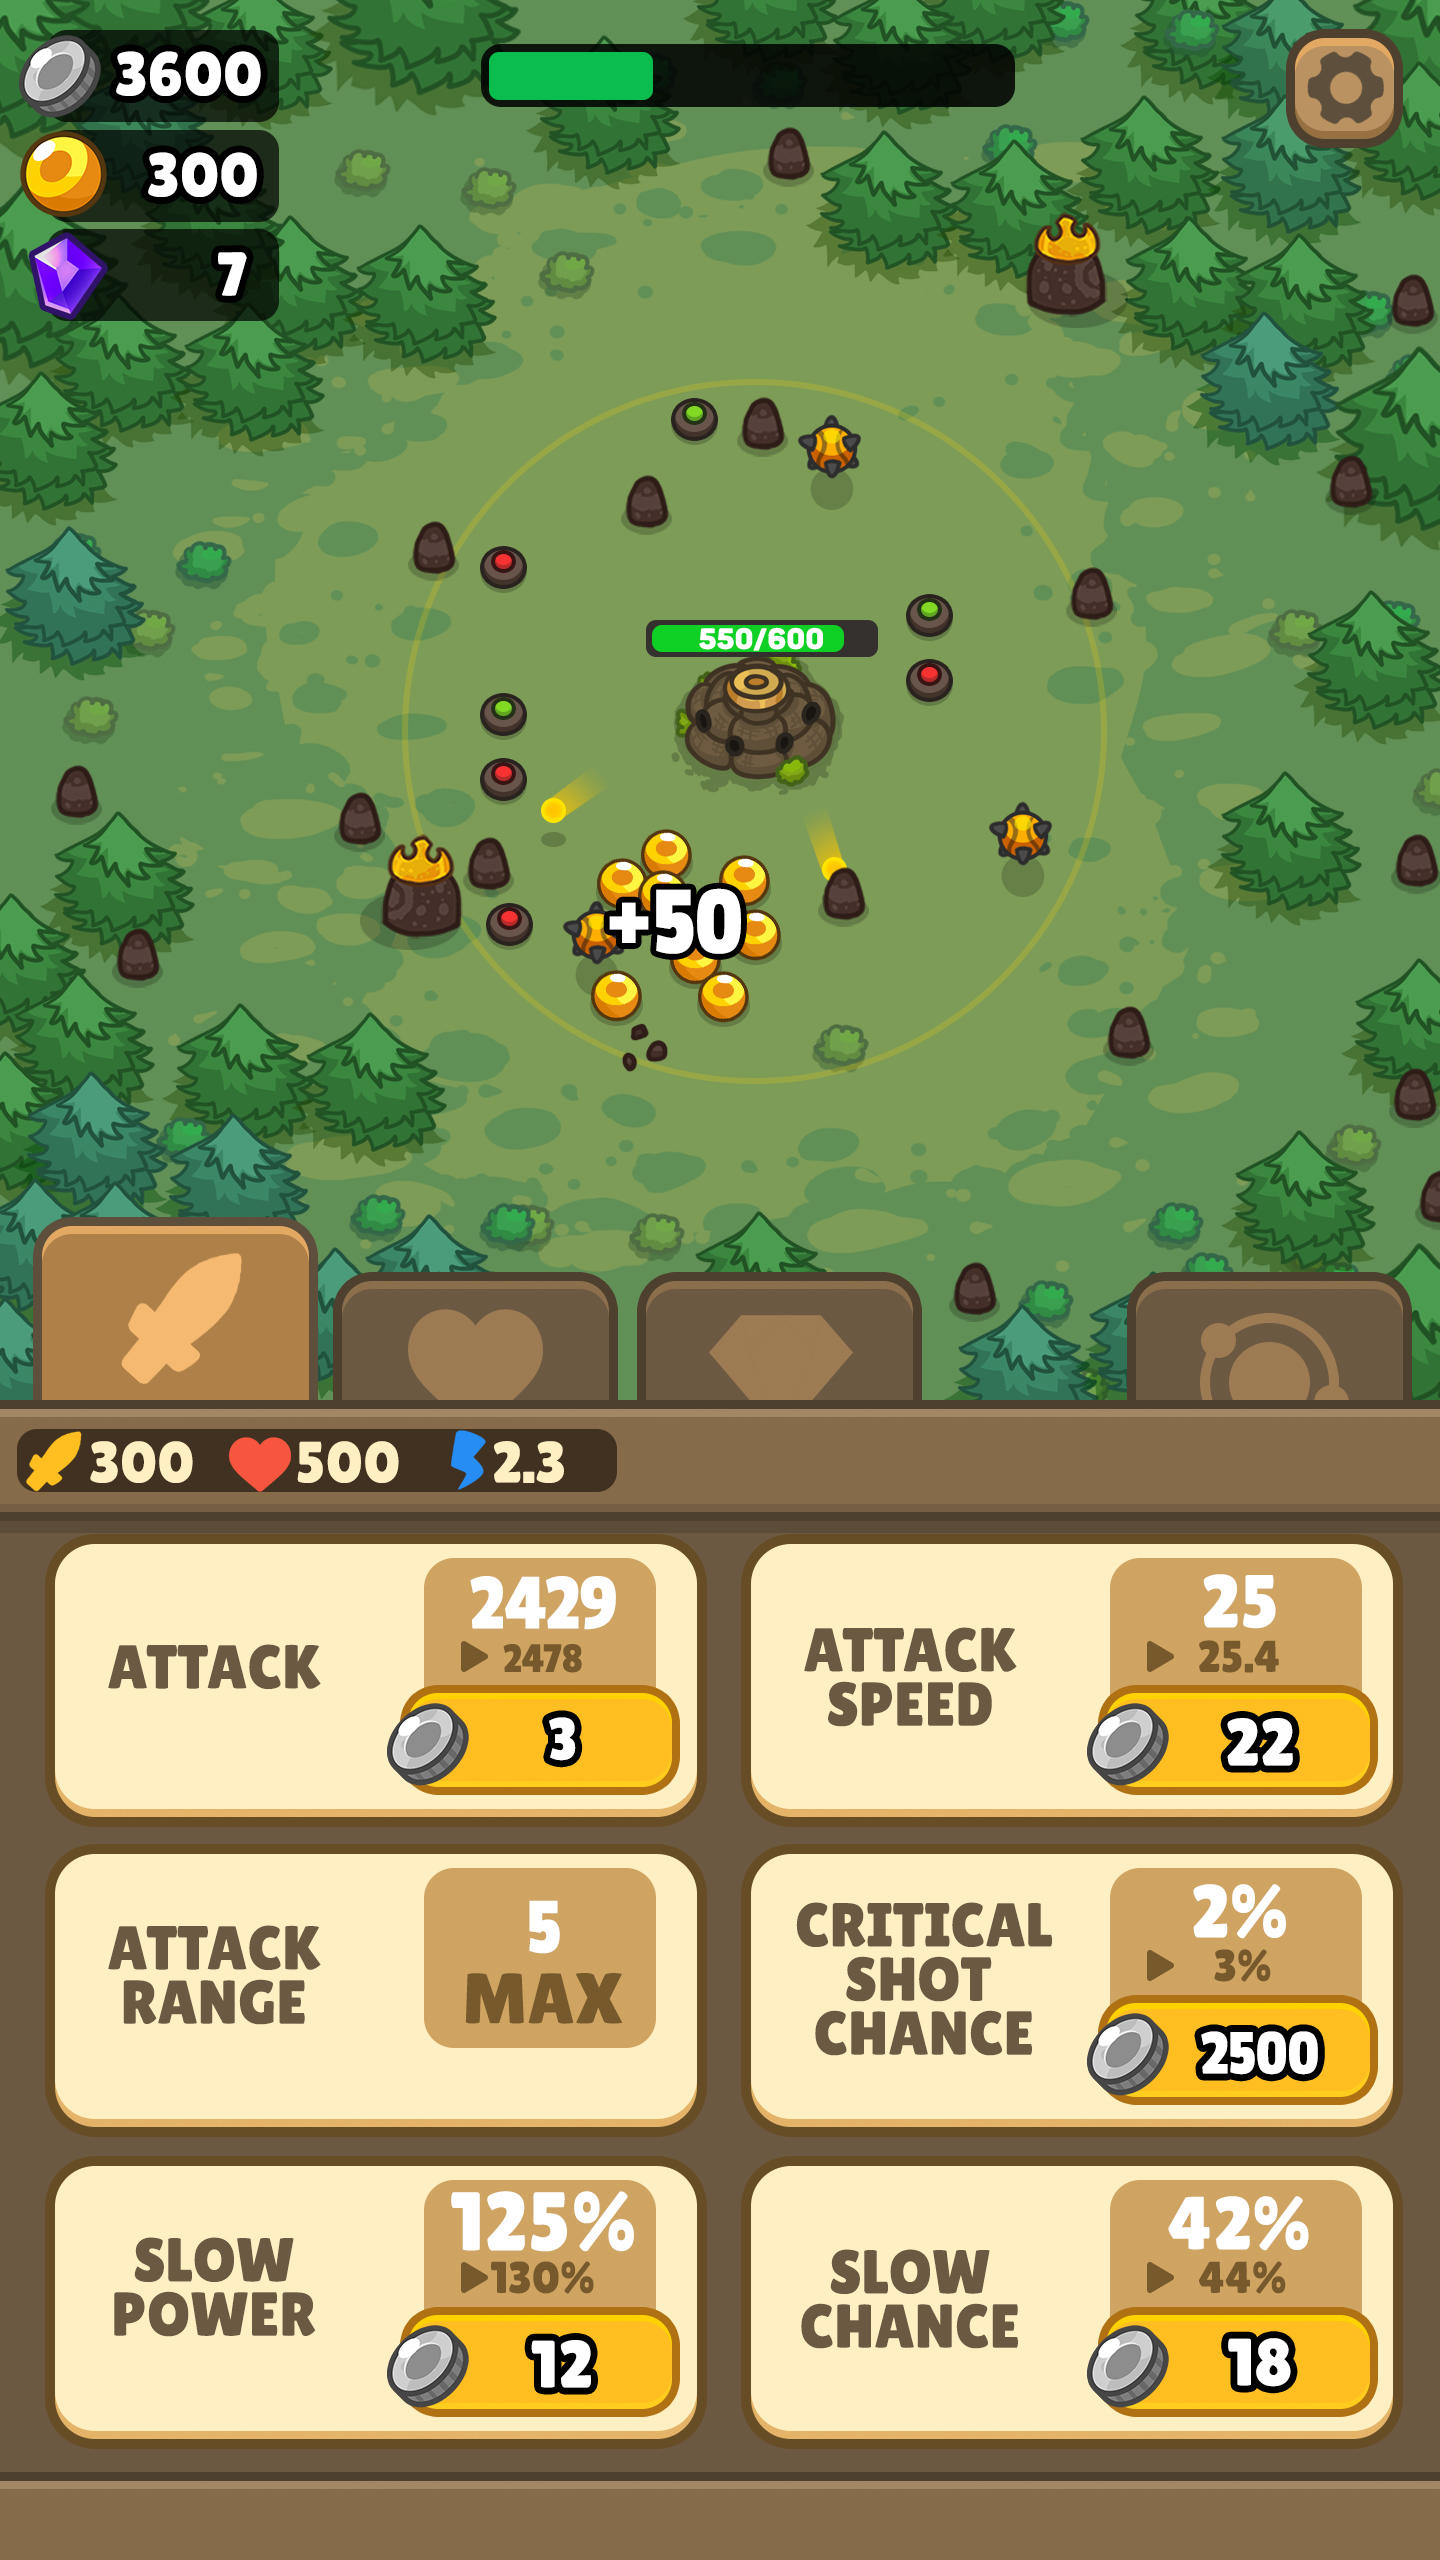 Screenshot 1 of Idle Fortress Tower Defense 4.2.1